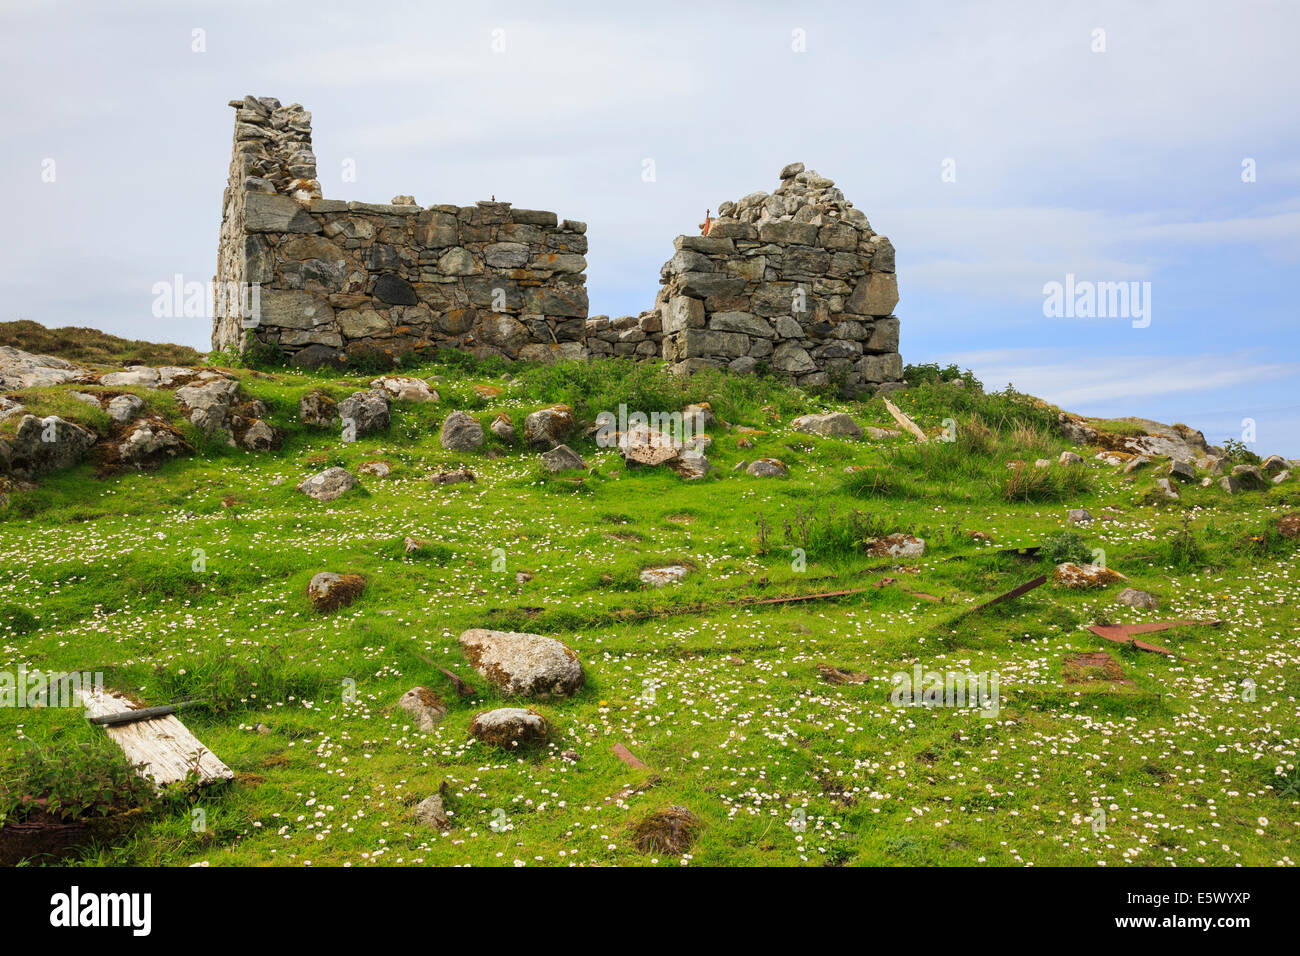 Hebridean scene with old abandoned croft cottage near Loch Sgioport, South Uist, Outer Hebrides, Western Isles, Scotland, UK Stock Photo